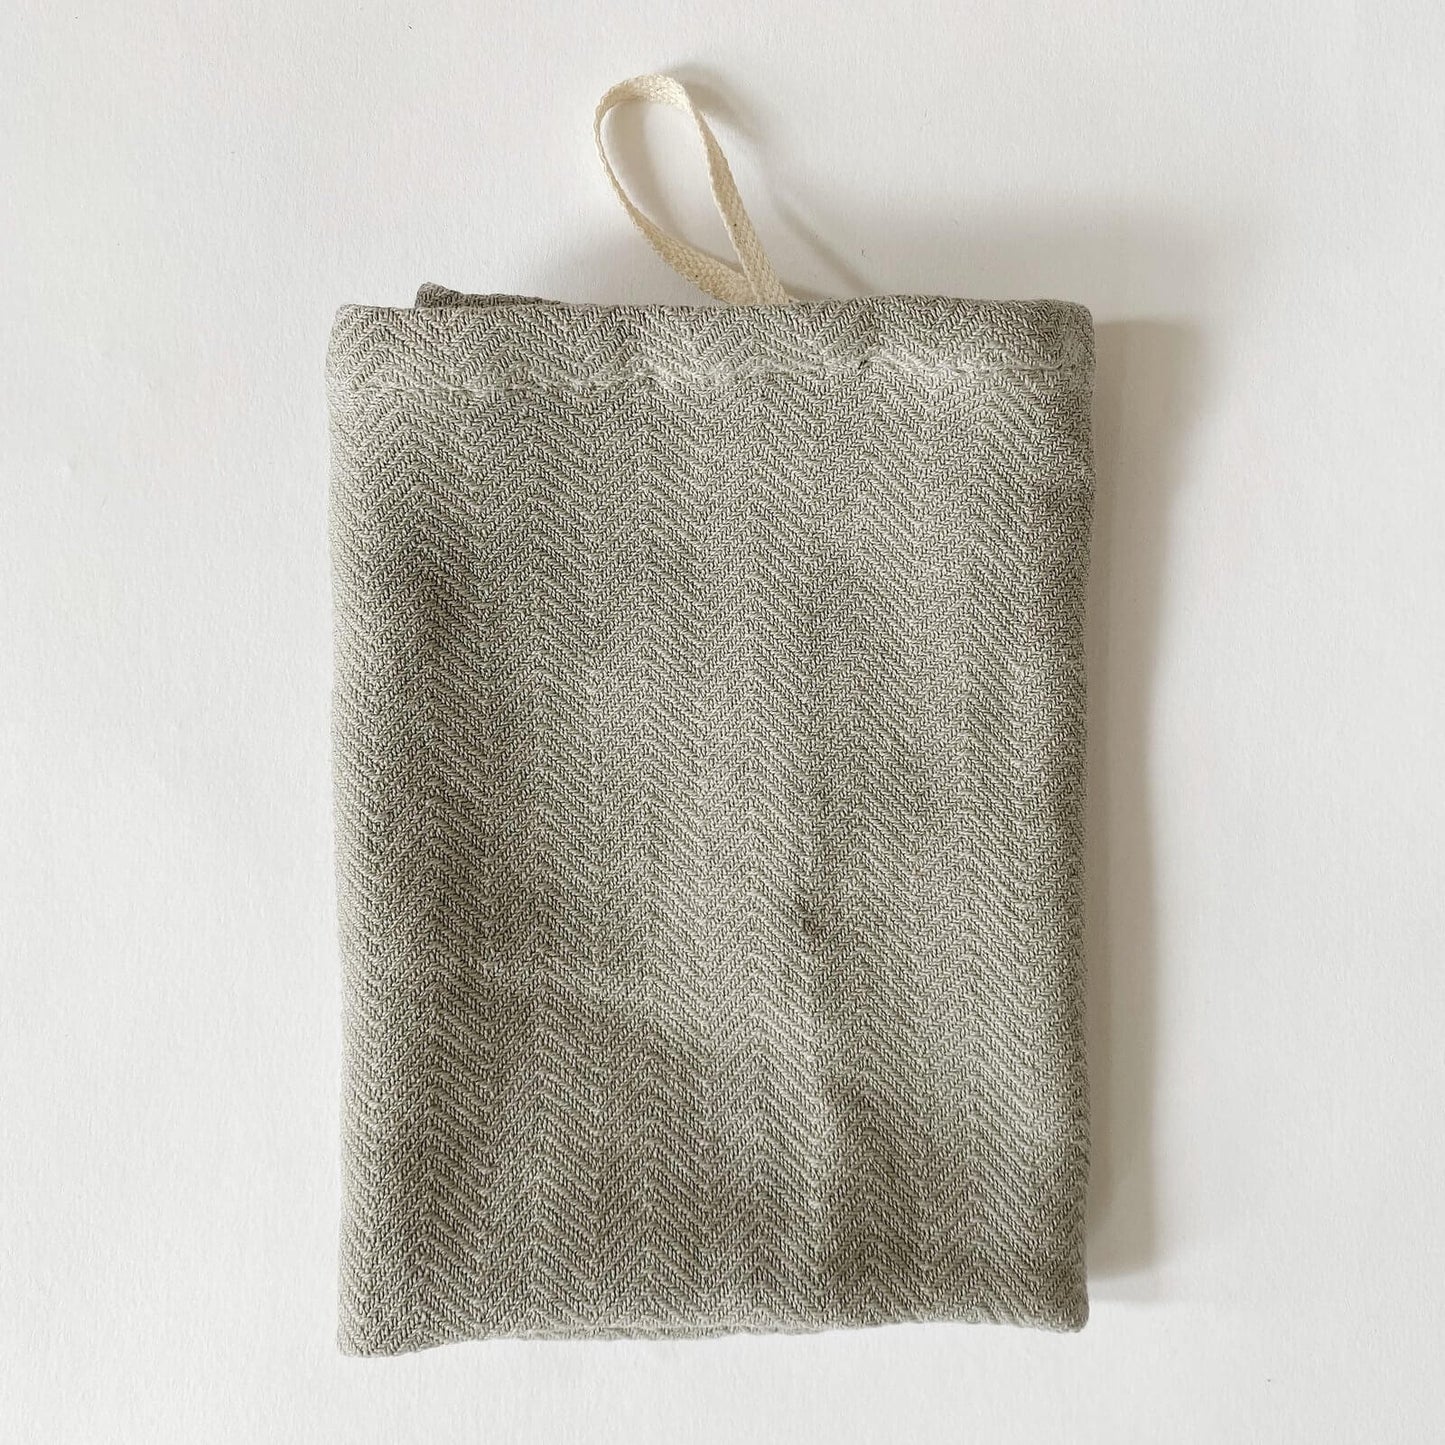 Turkish Cotton Wash Cloth - by House of Jude Skincare House of Jude Haven Prettycleanshop